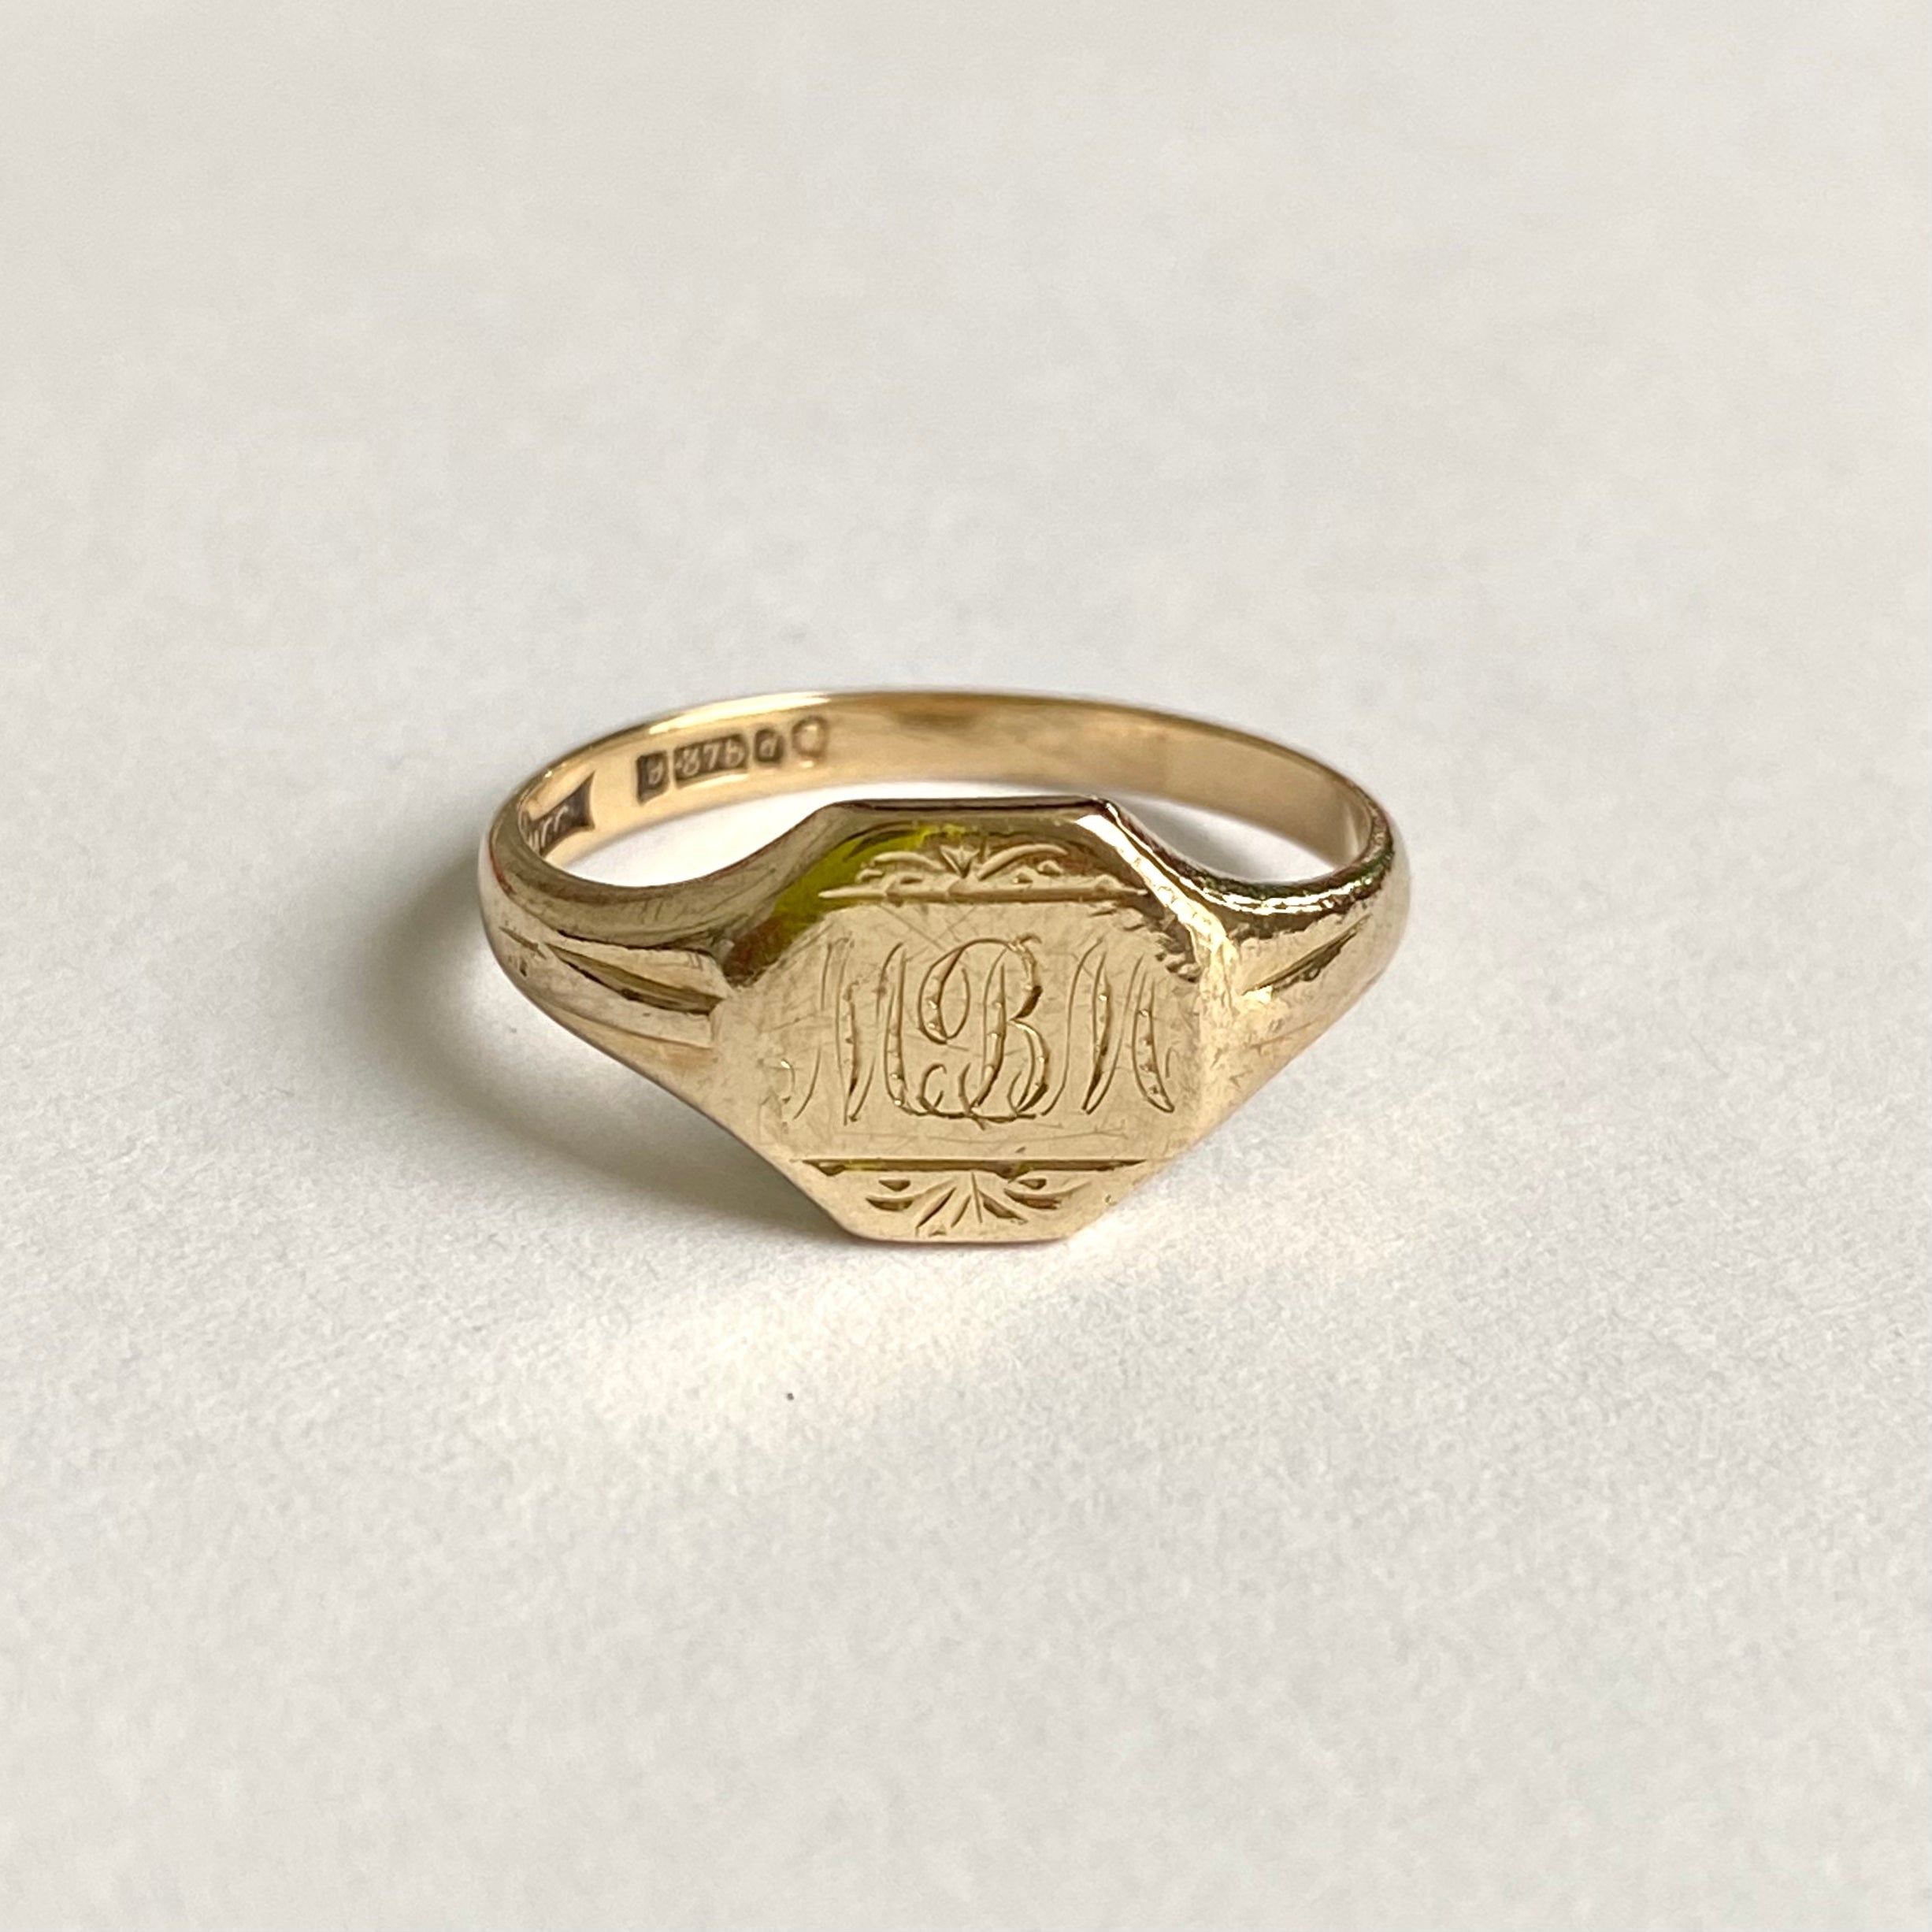 England Vintage 9ct Gold Ring